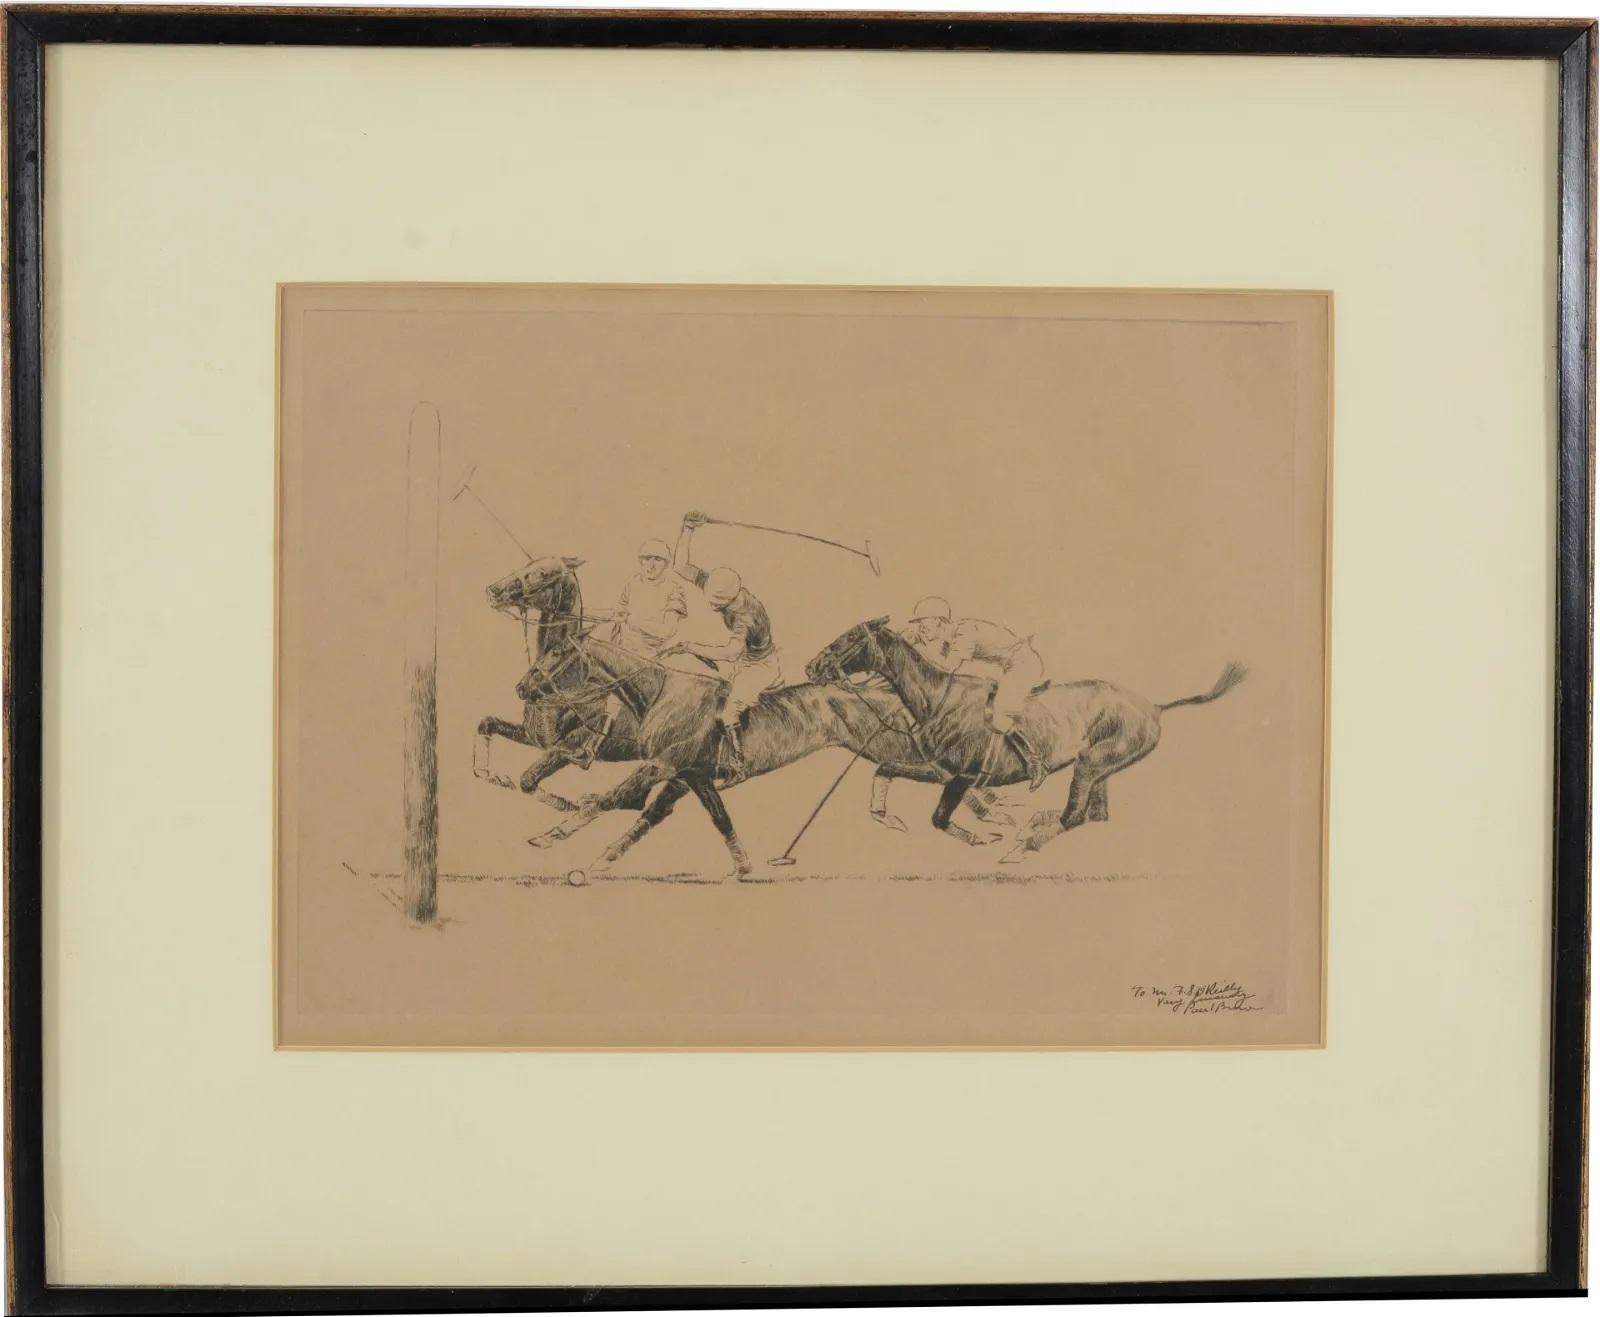 "Paul Brown 3 Polo Players Attacking Goal Drypoint Etching" - Art by Paul Desmond Brown